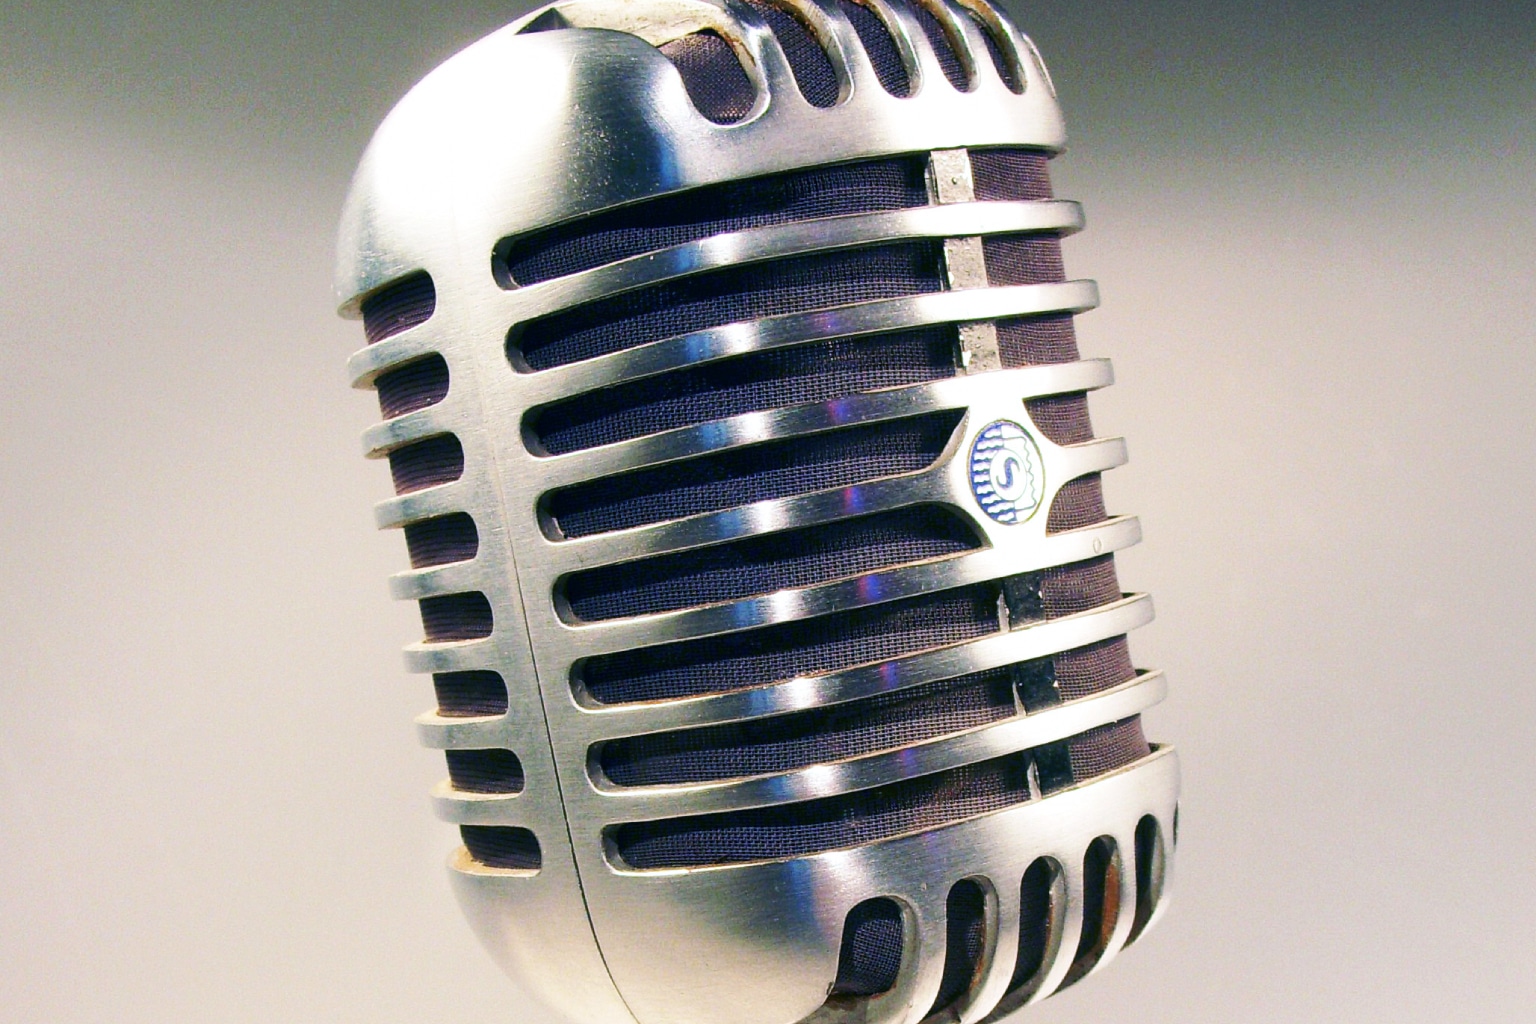 History of Microphones